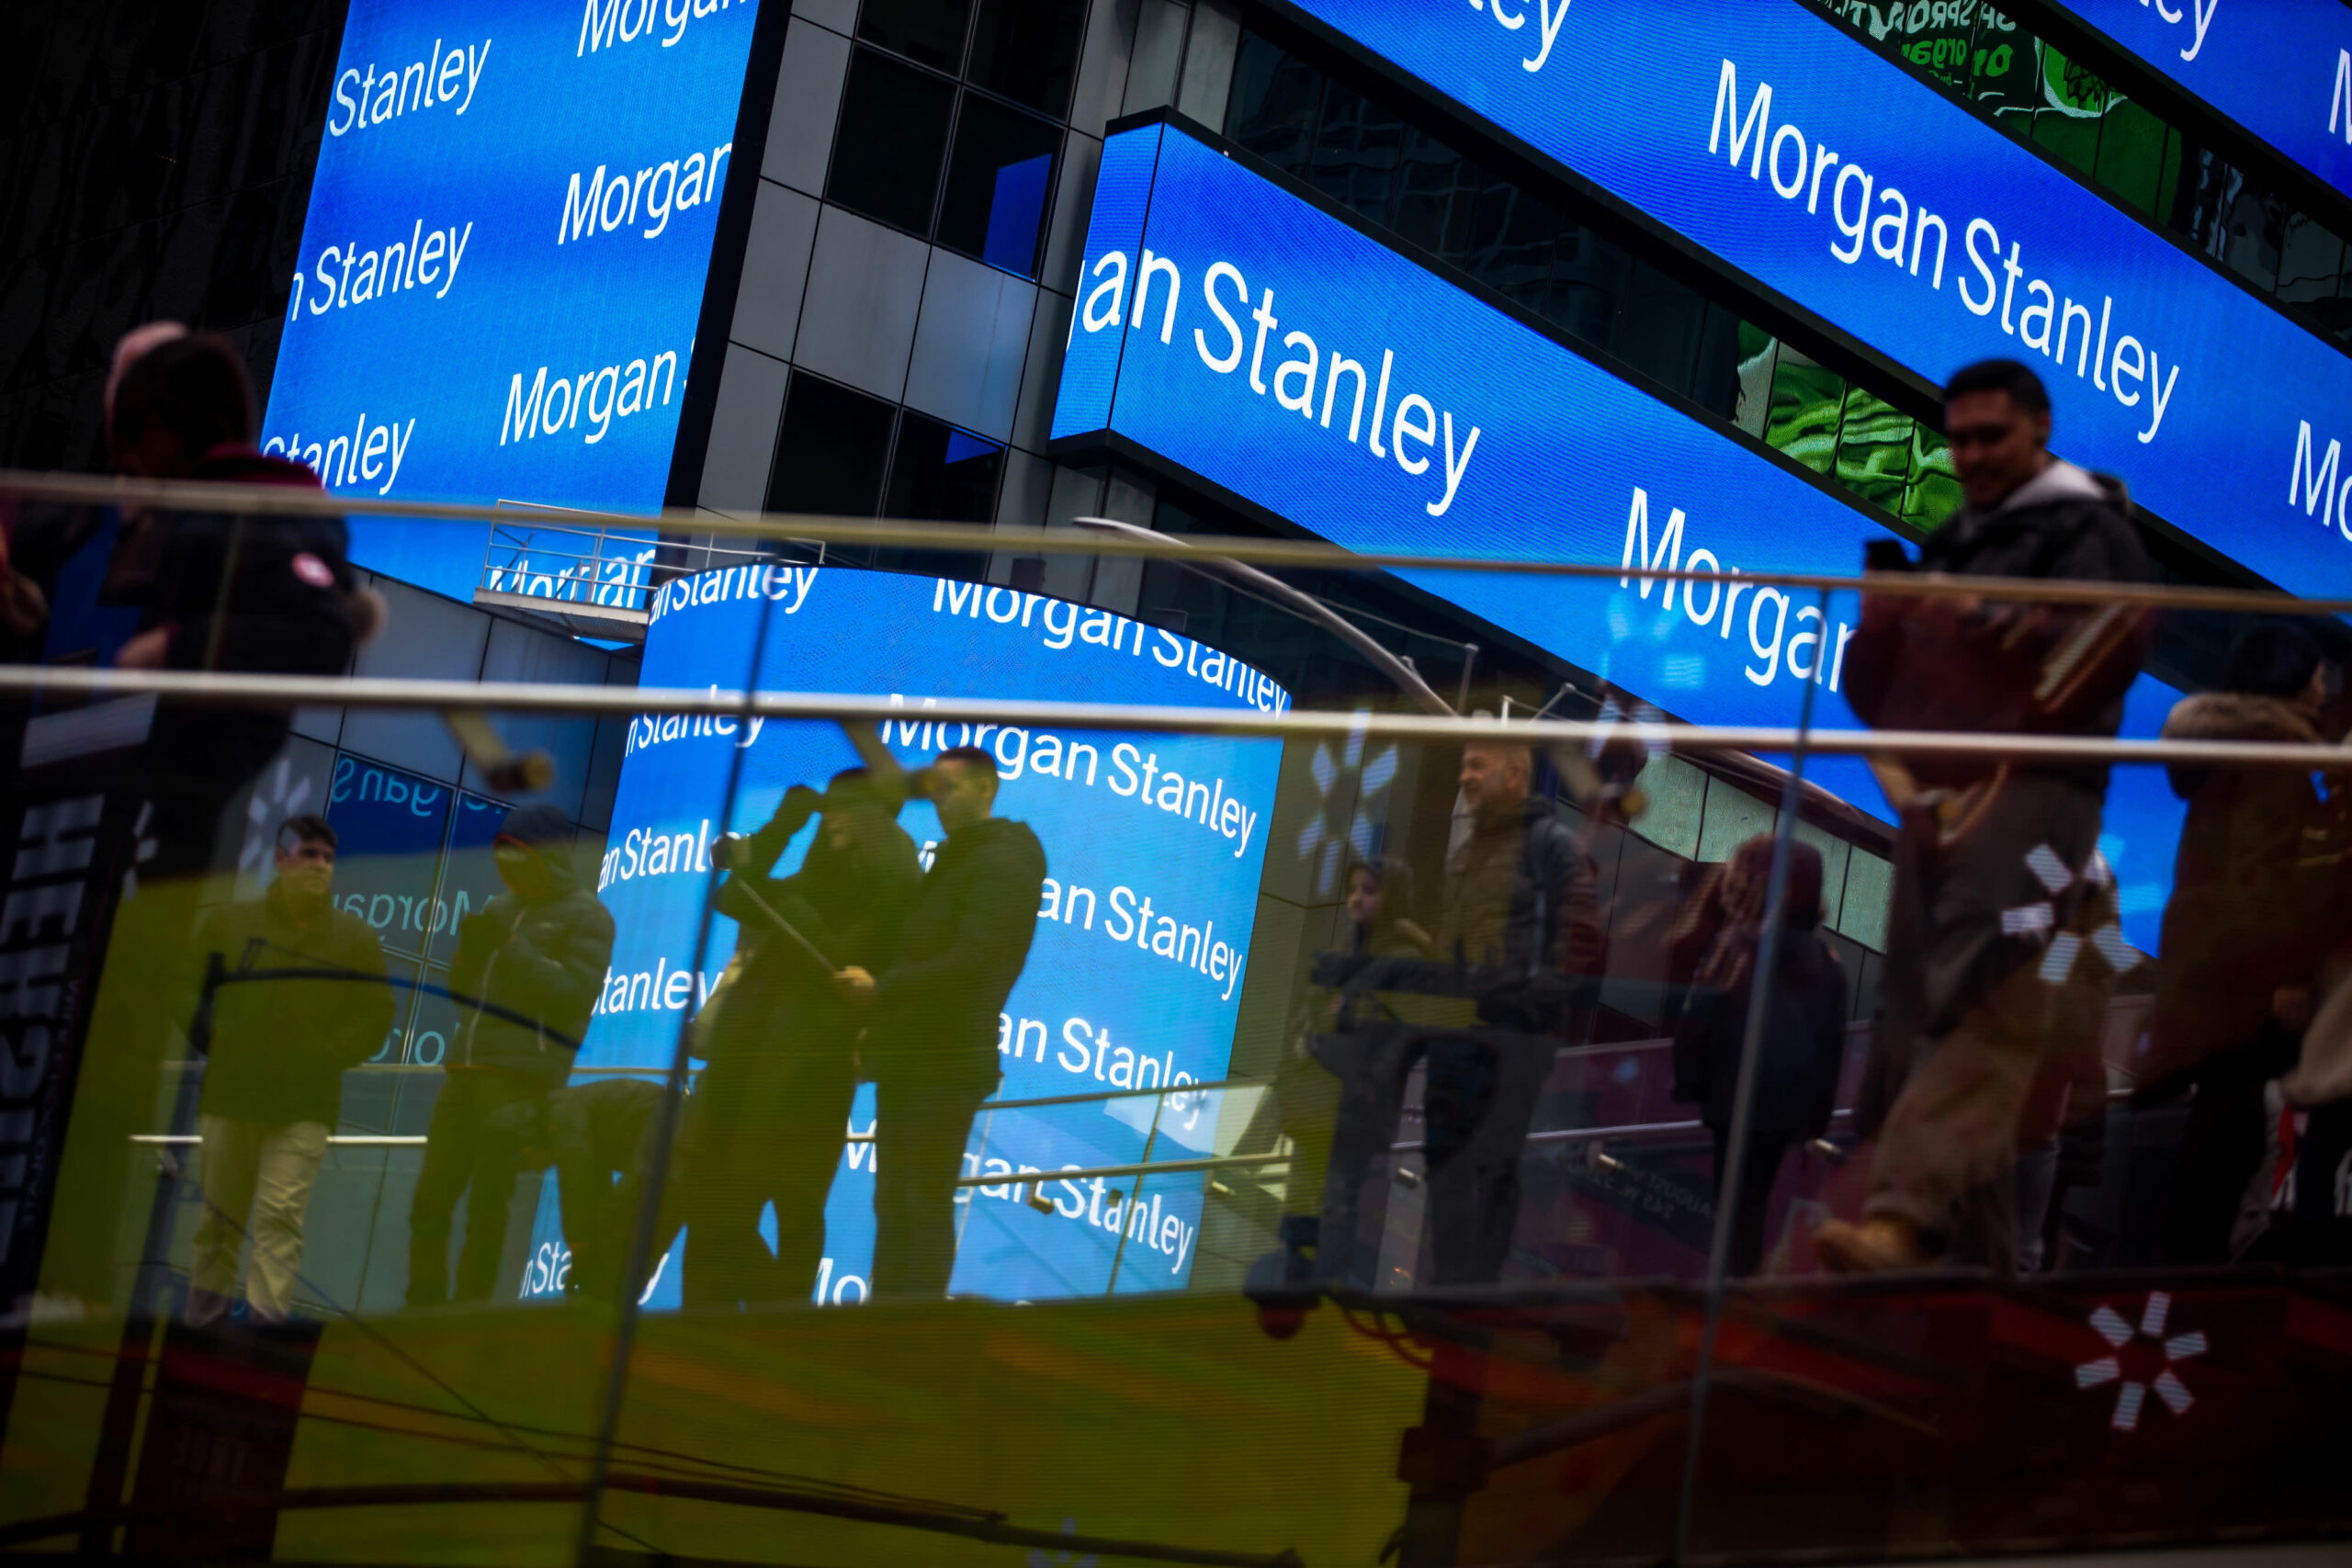 Morgan Stanley dumped $5 billion in Archegos’ shares earlier than fireplace sale